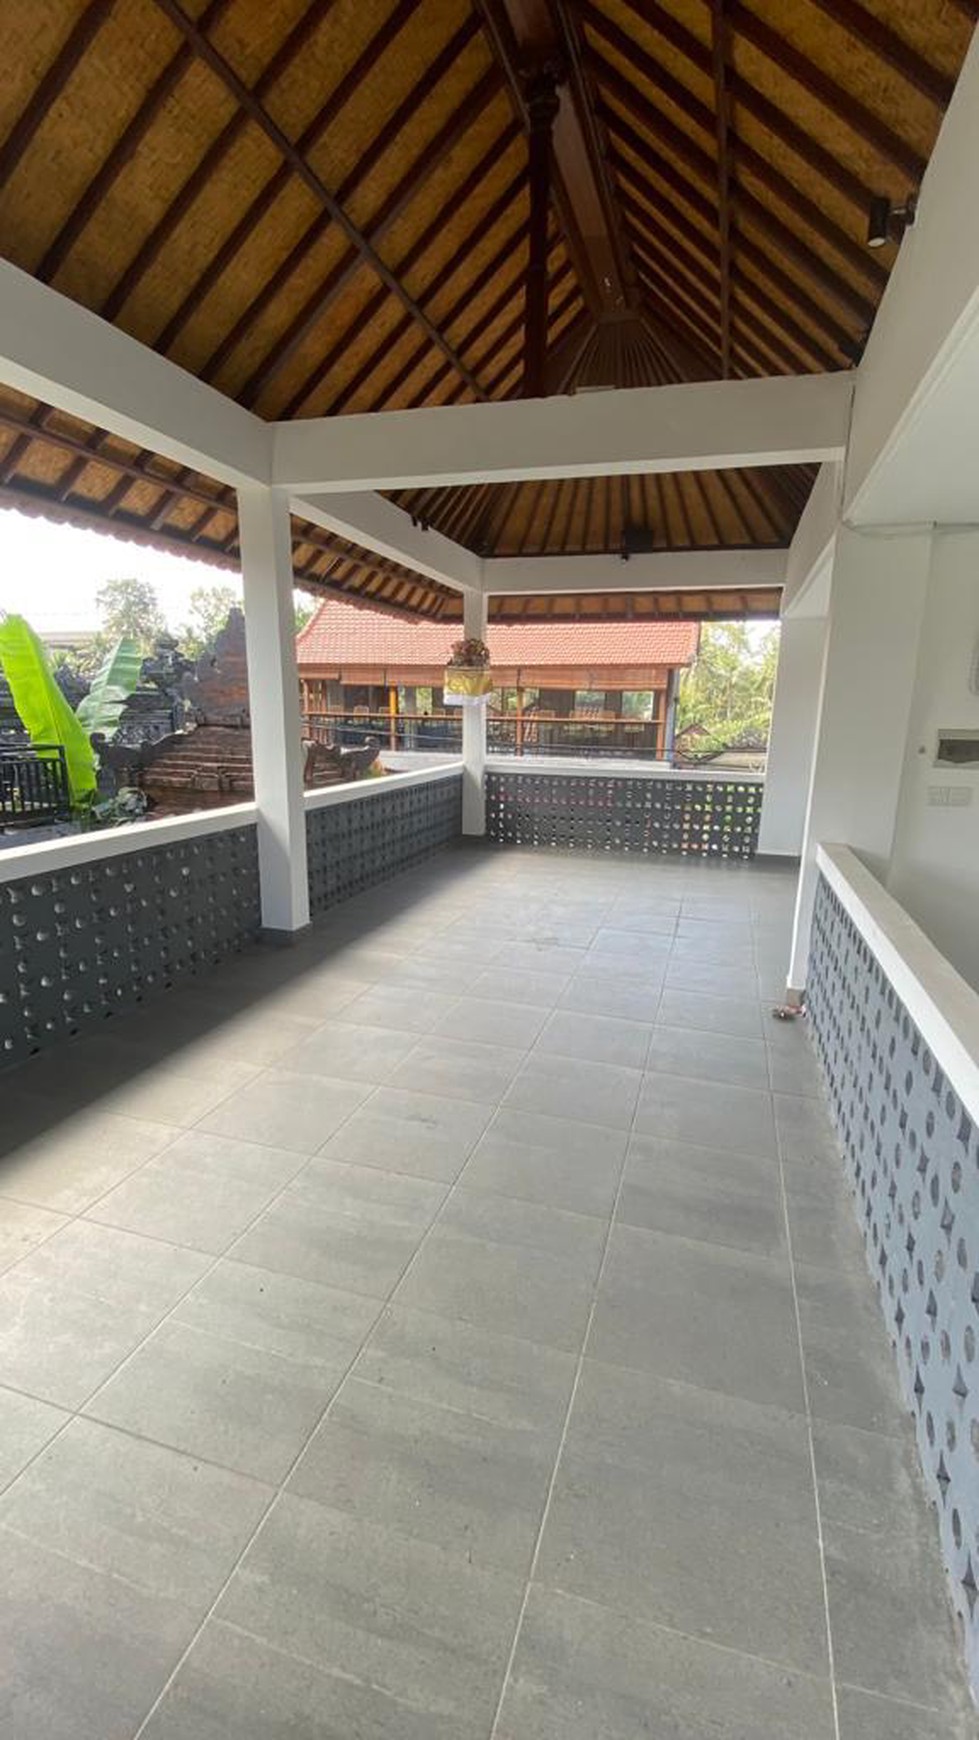 95 Sqm Commercial Space For Rent In Perfect Location In Ubud